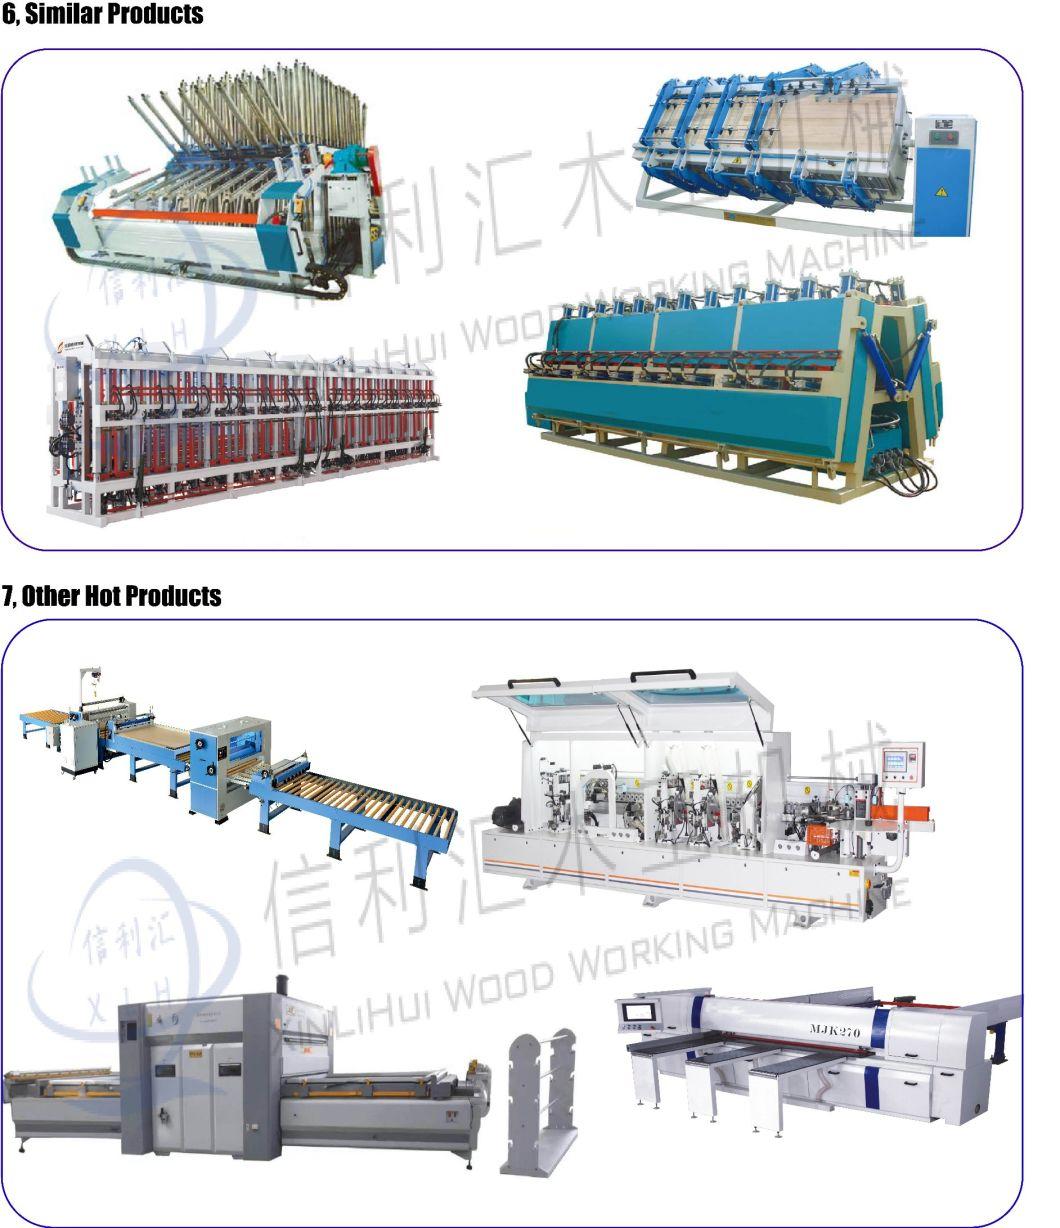 Tooth Prick Packaging Machine, Tooth Pick Machine, Wood Tooth Pick Packaging Machine, Spice Packaging Bamboo Tooth Prick Machine, Tooth Pick Maker